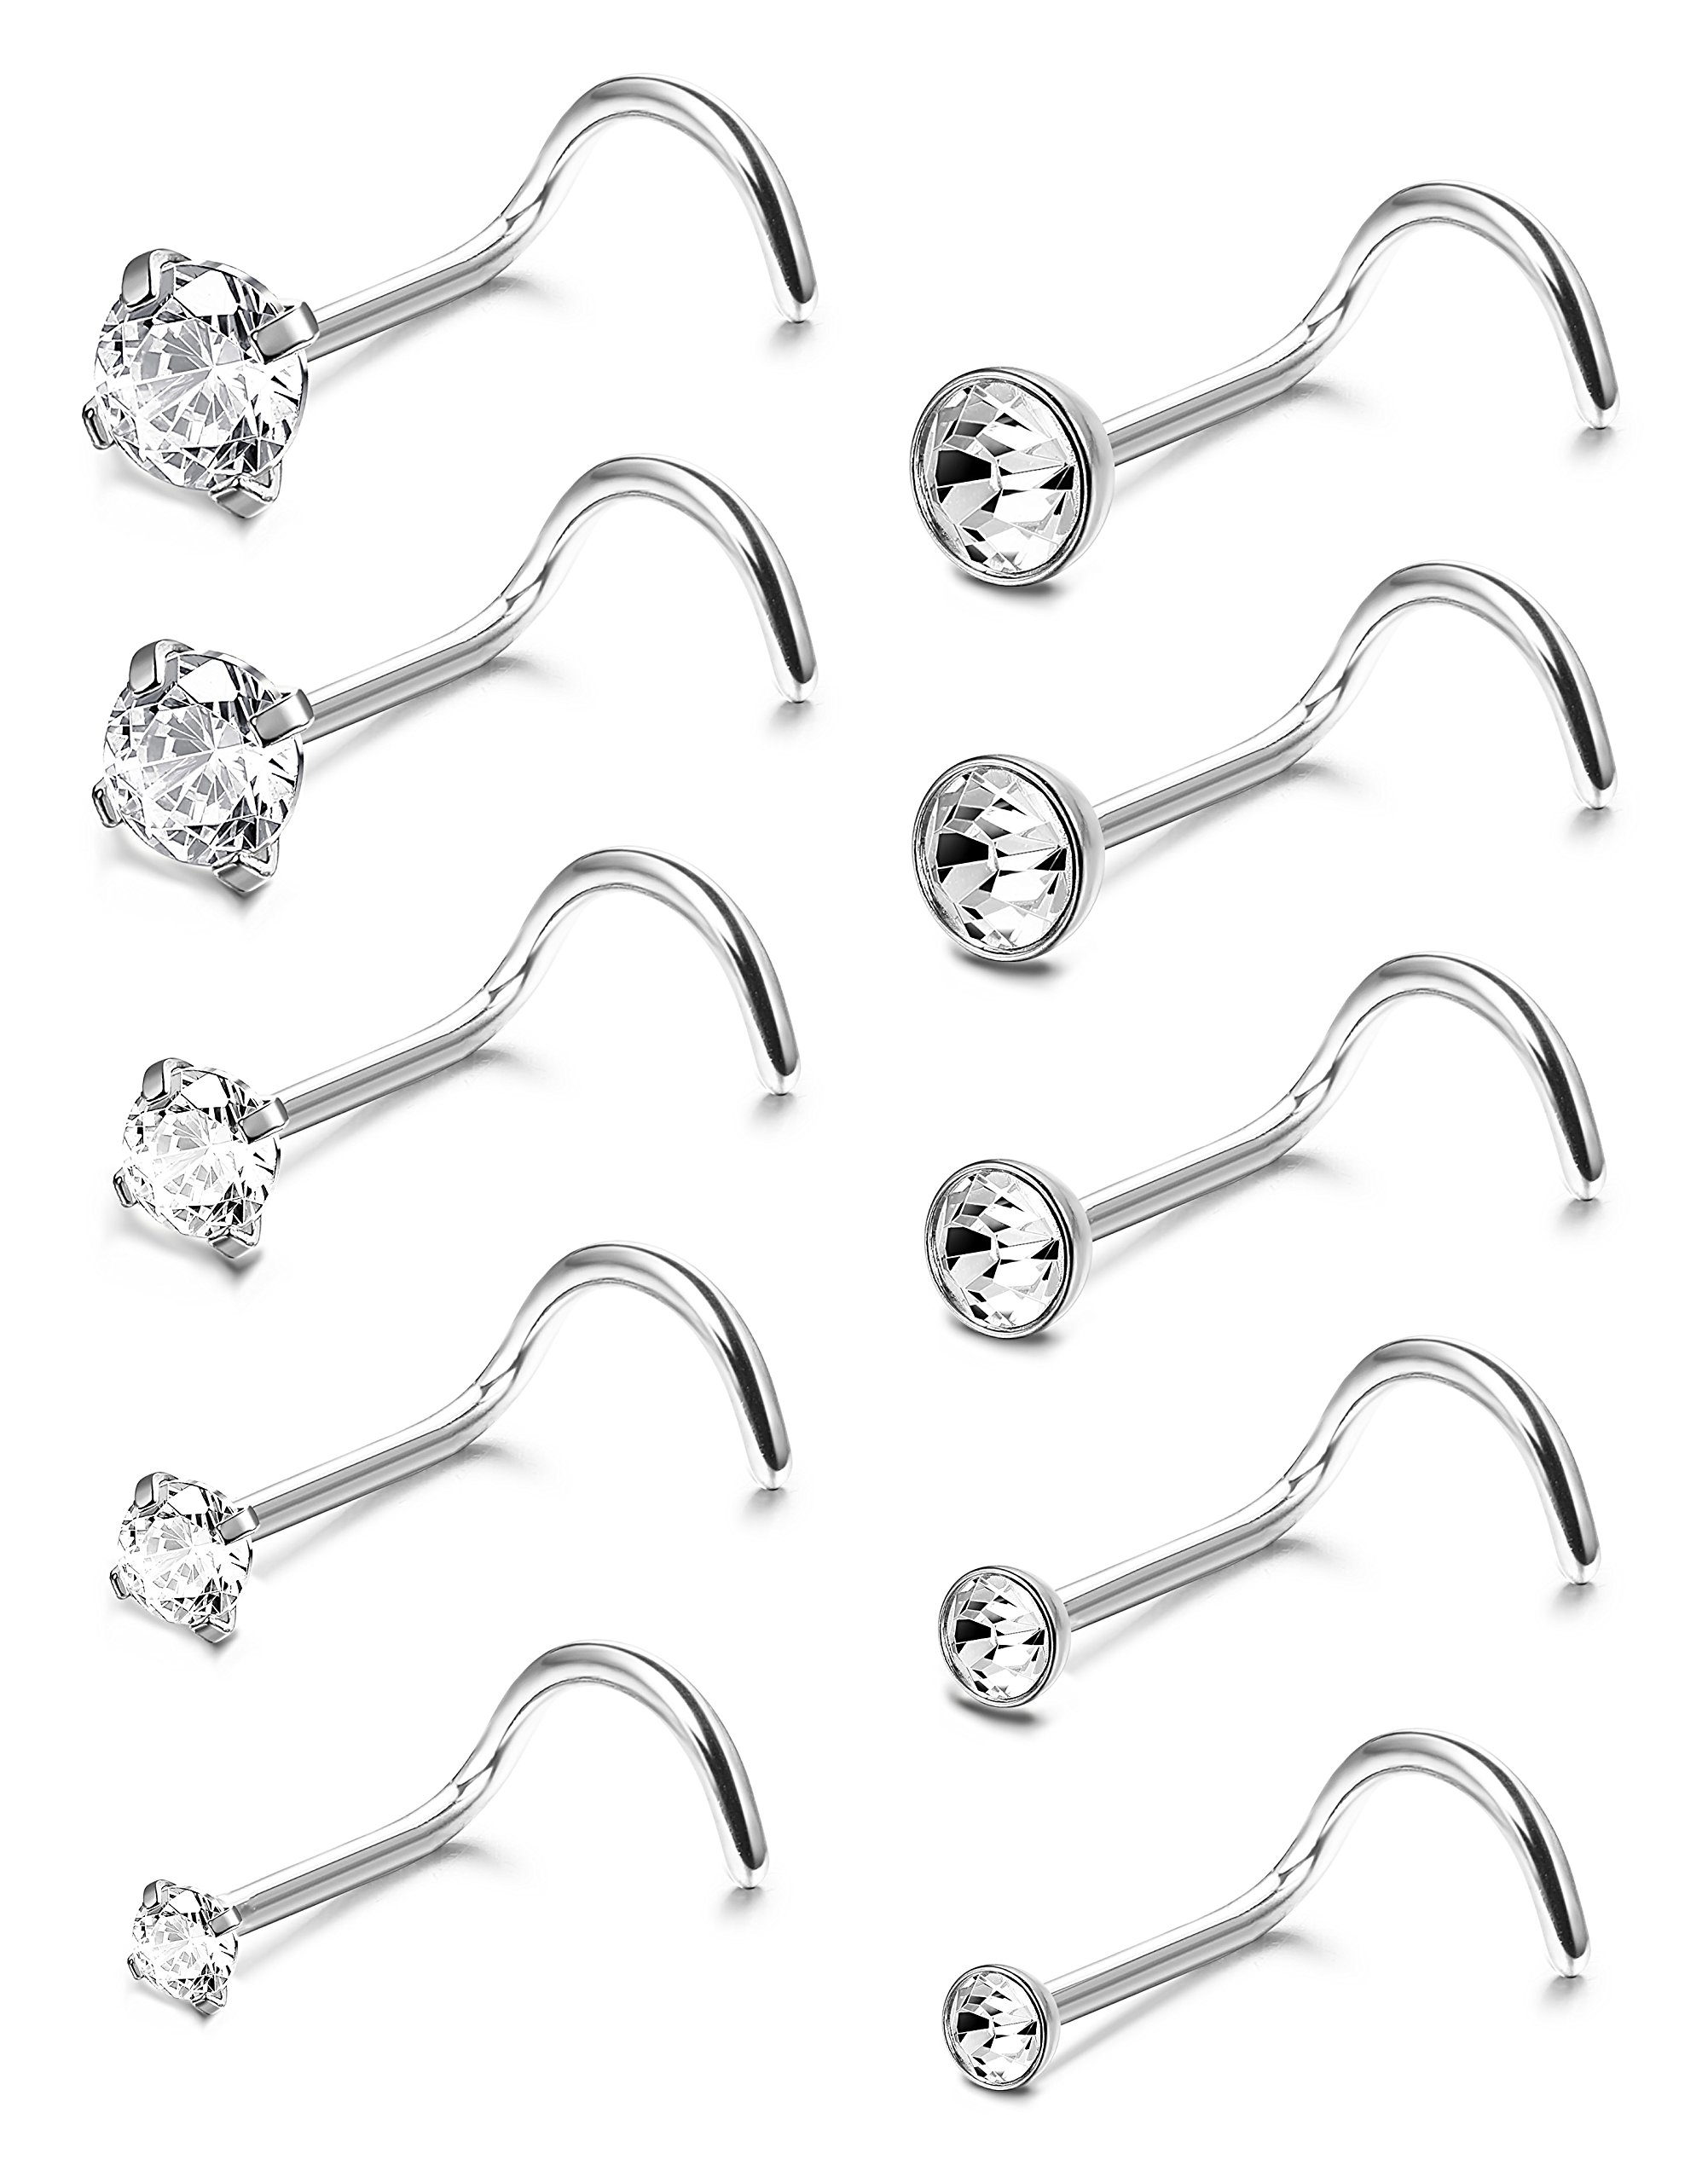 FIBO STEEL 10-30Pcs 20G Stainless Steel Nose Ring Studs Body Jewelry Piercing CZ Inlaid 1.5MM-3.5MM